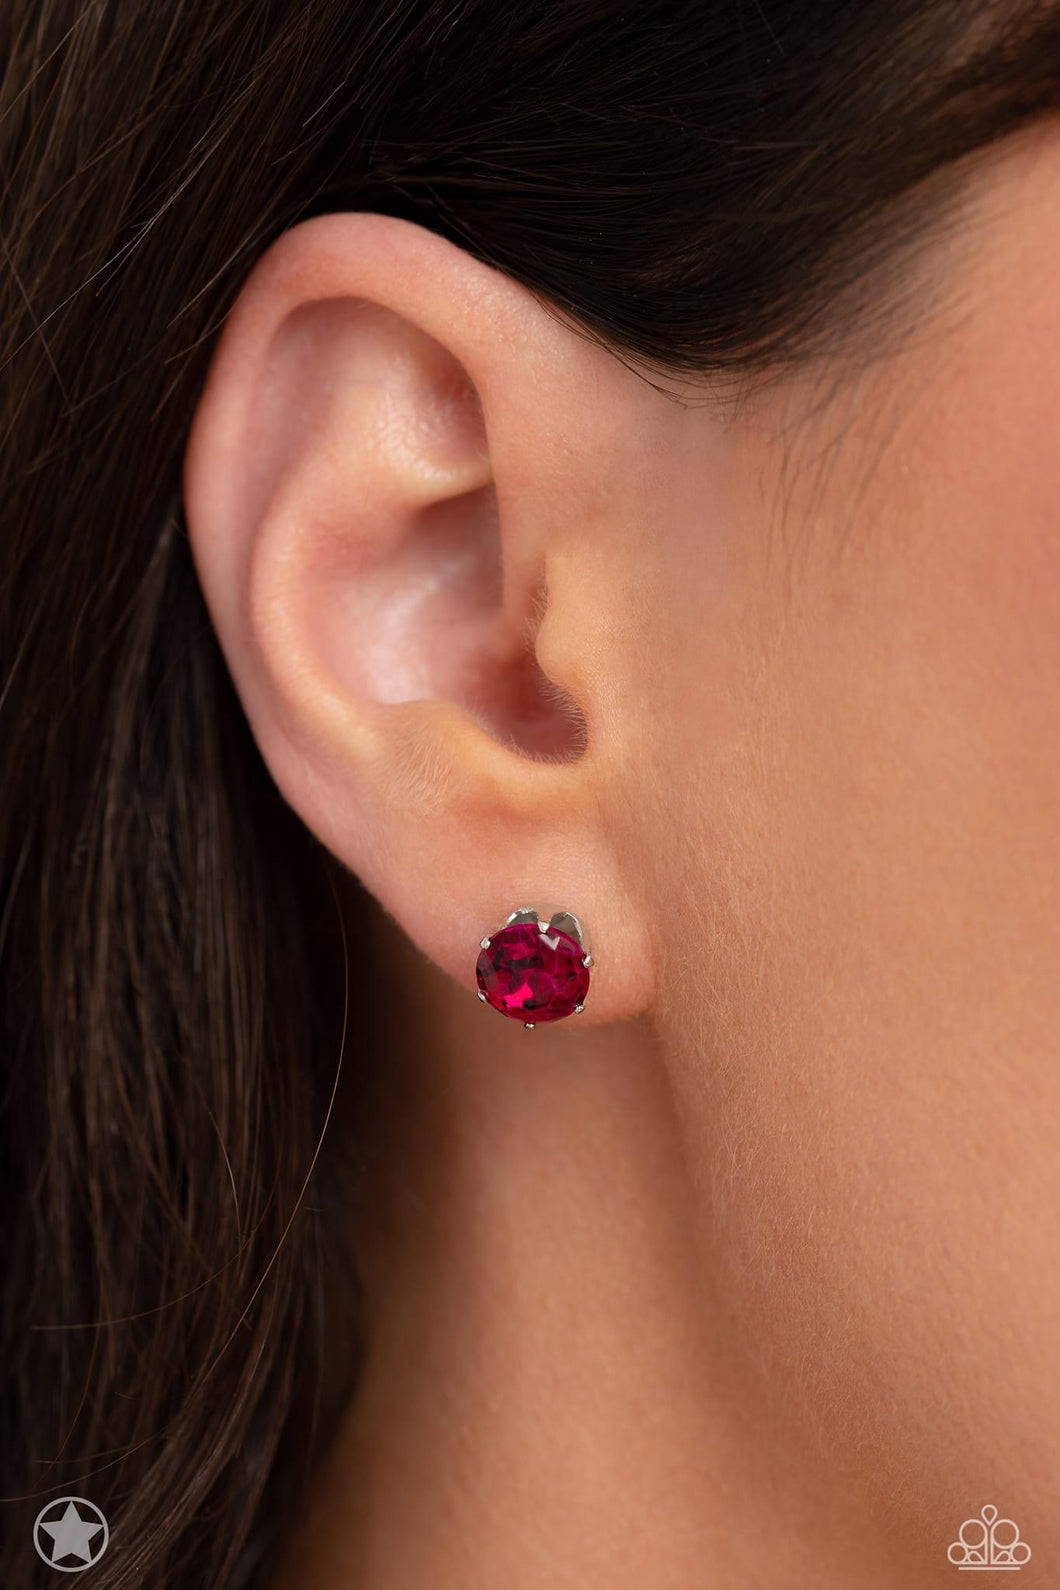 Just In TIMELESS - Pink Paparazzi earrings